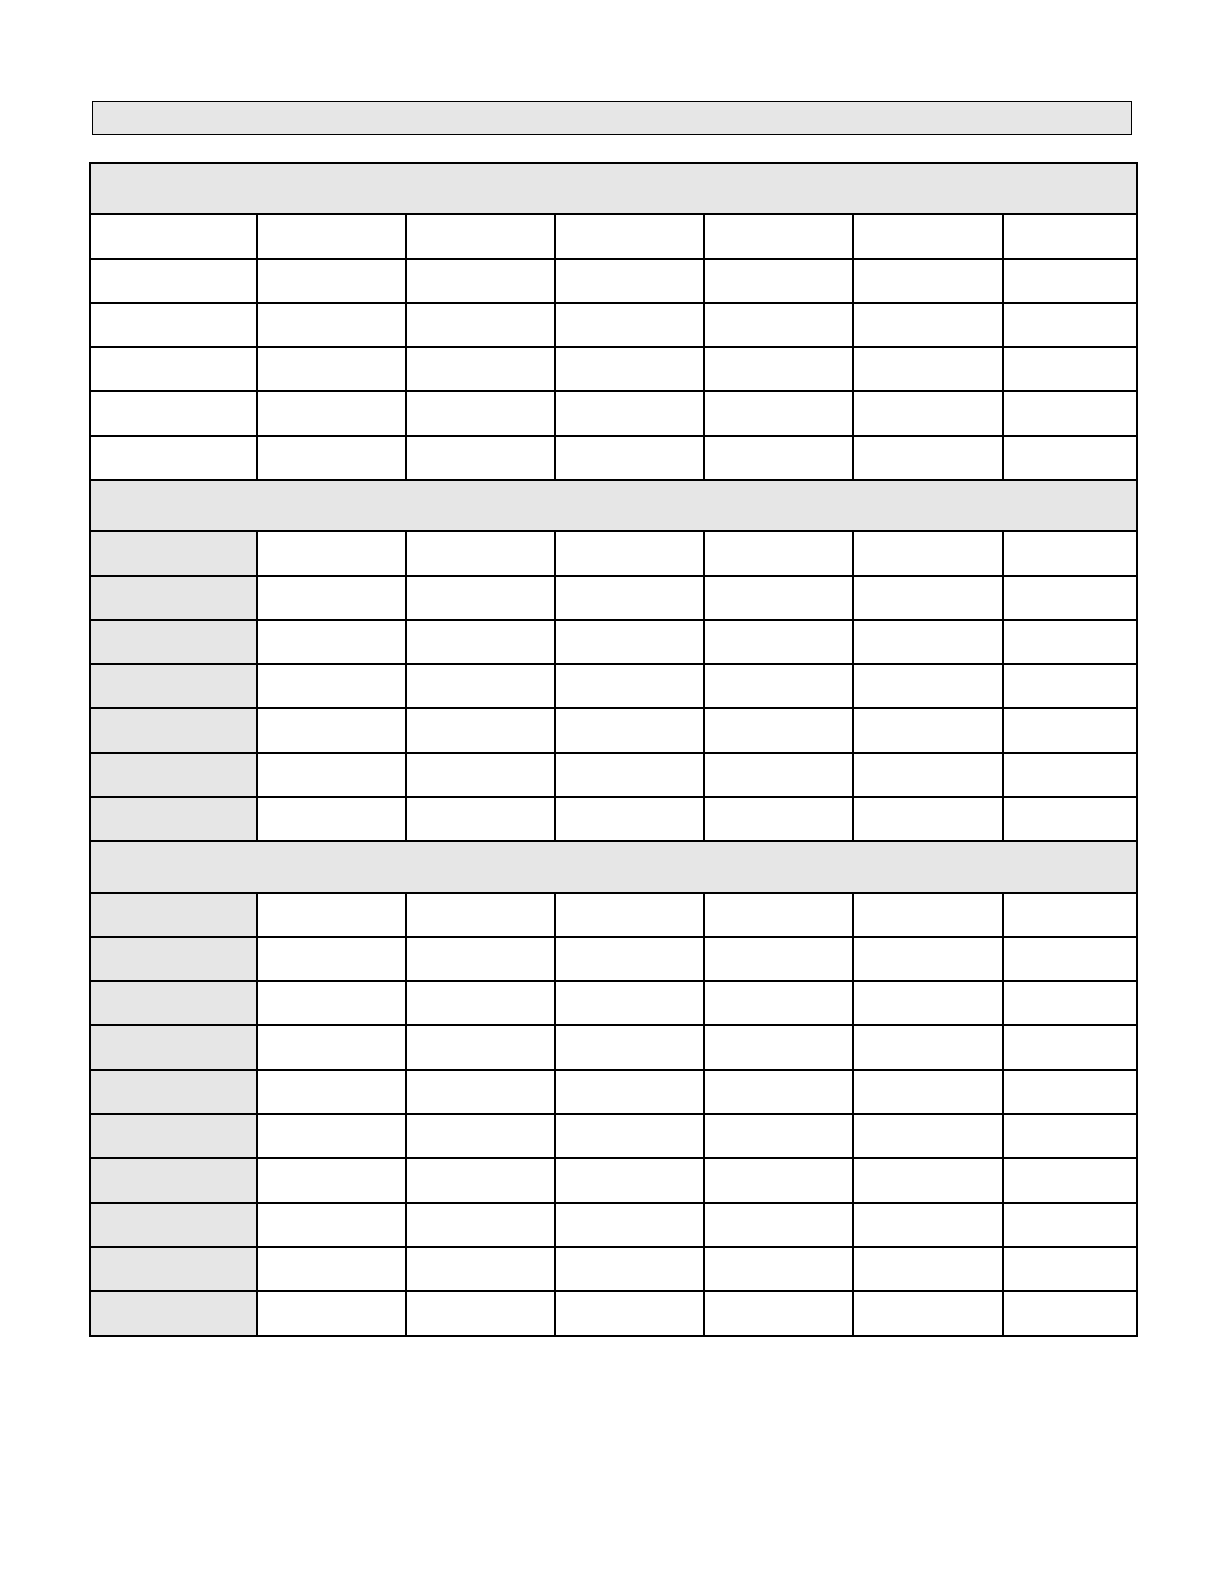 Clue Score Sheet Template - Edit, Fill, Sign Online  Handypdf Pertaining To Clue Card Template